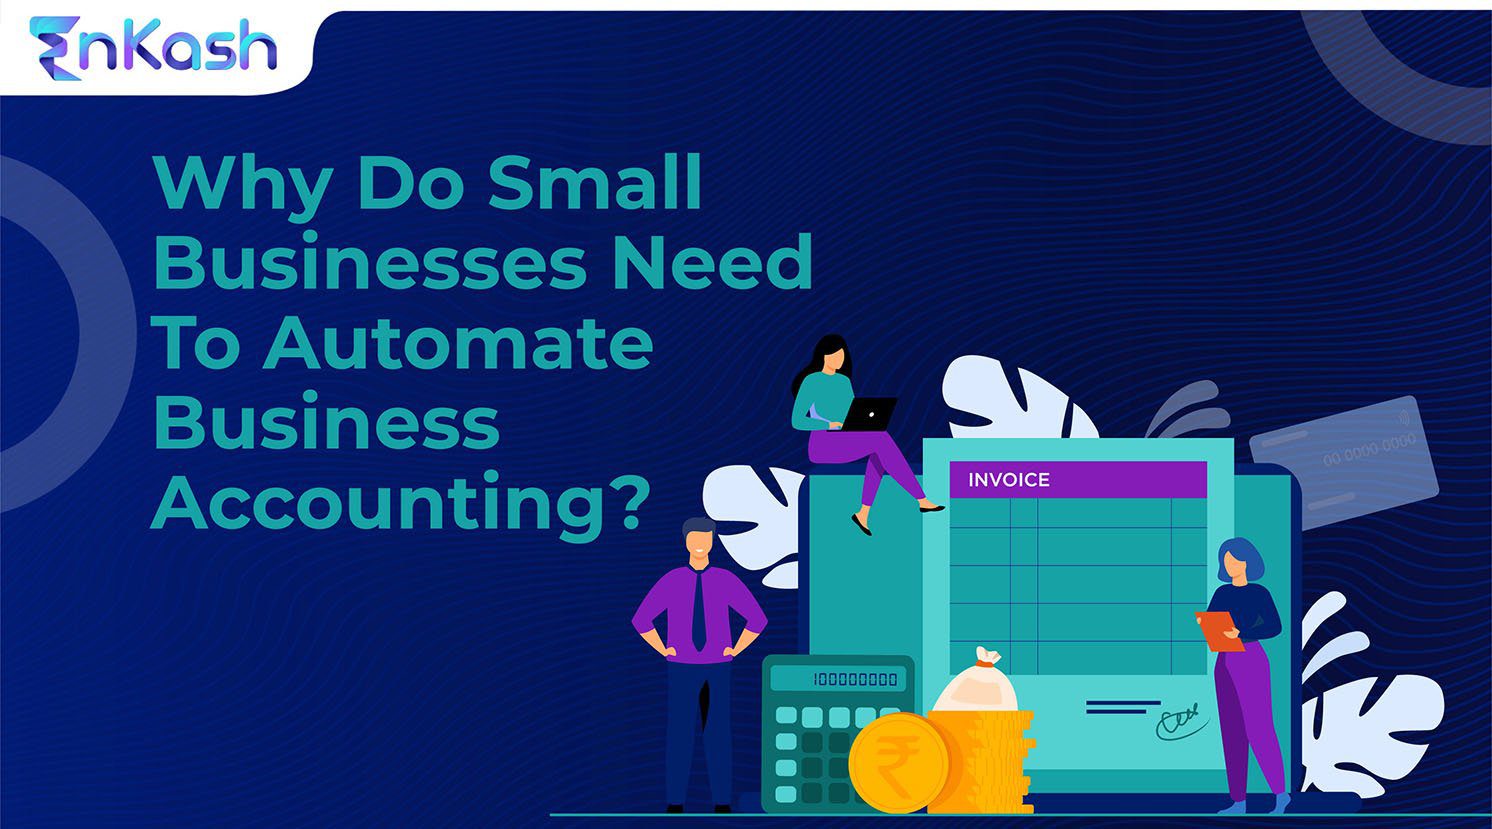 Automate Business Accounting